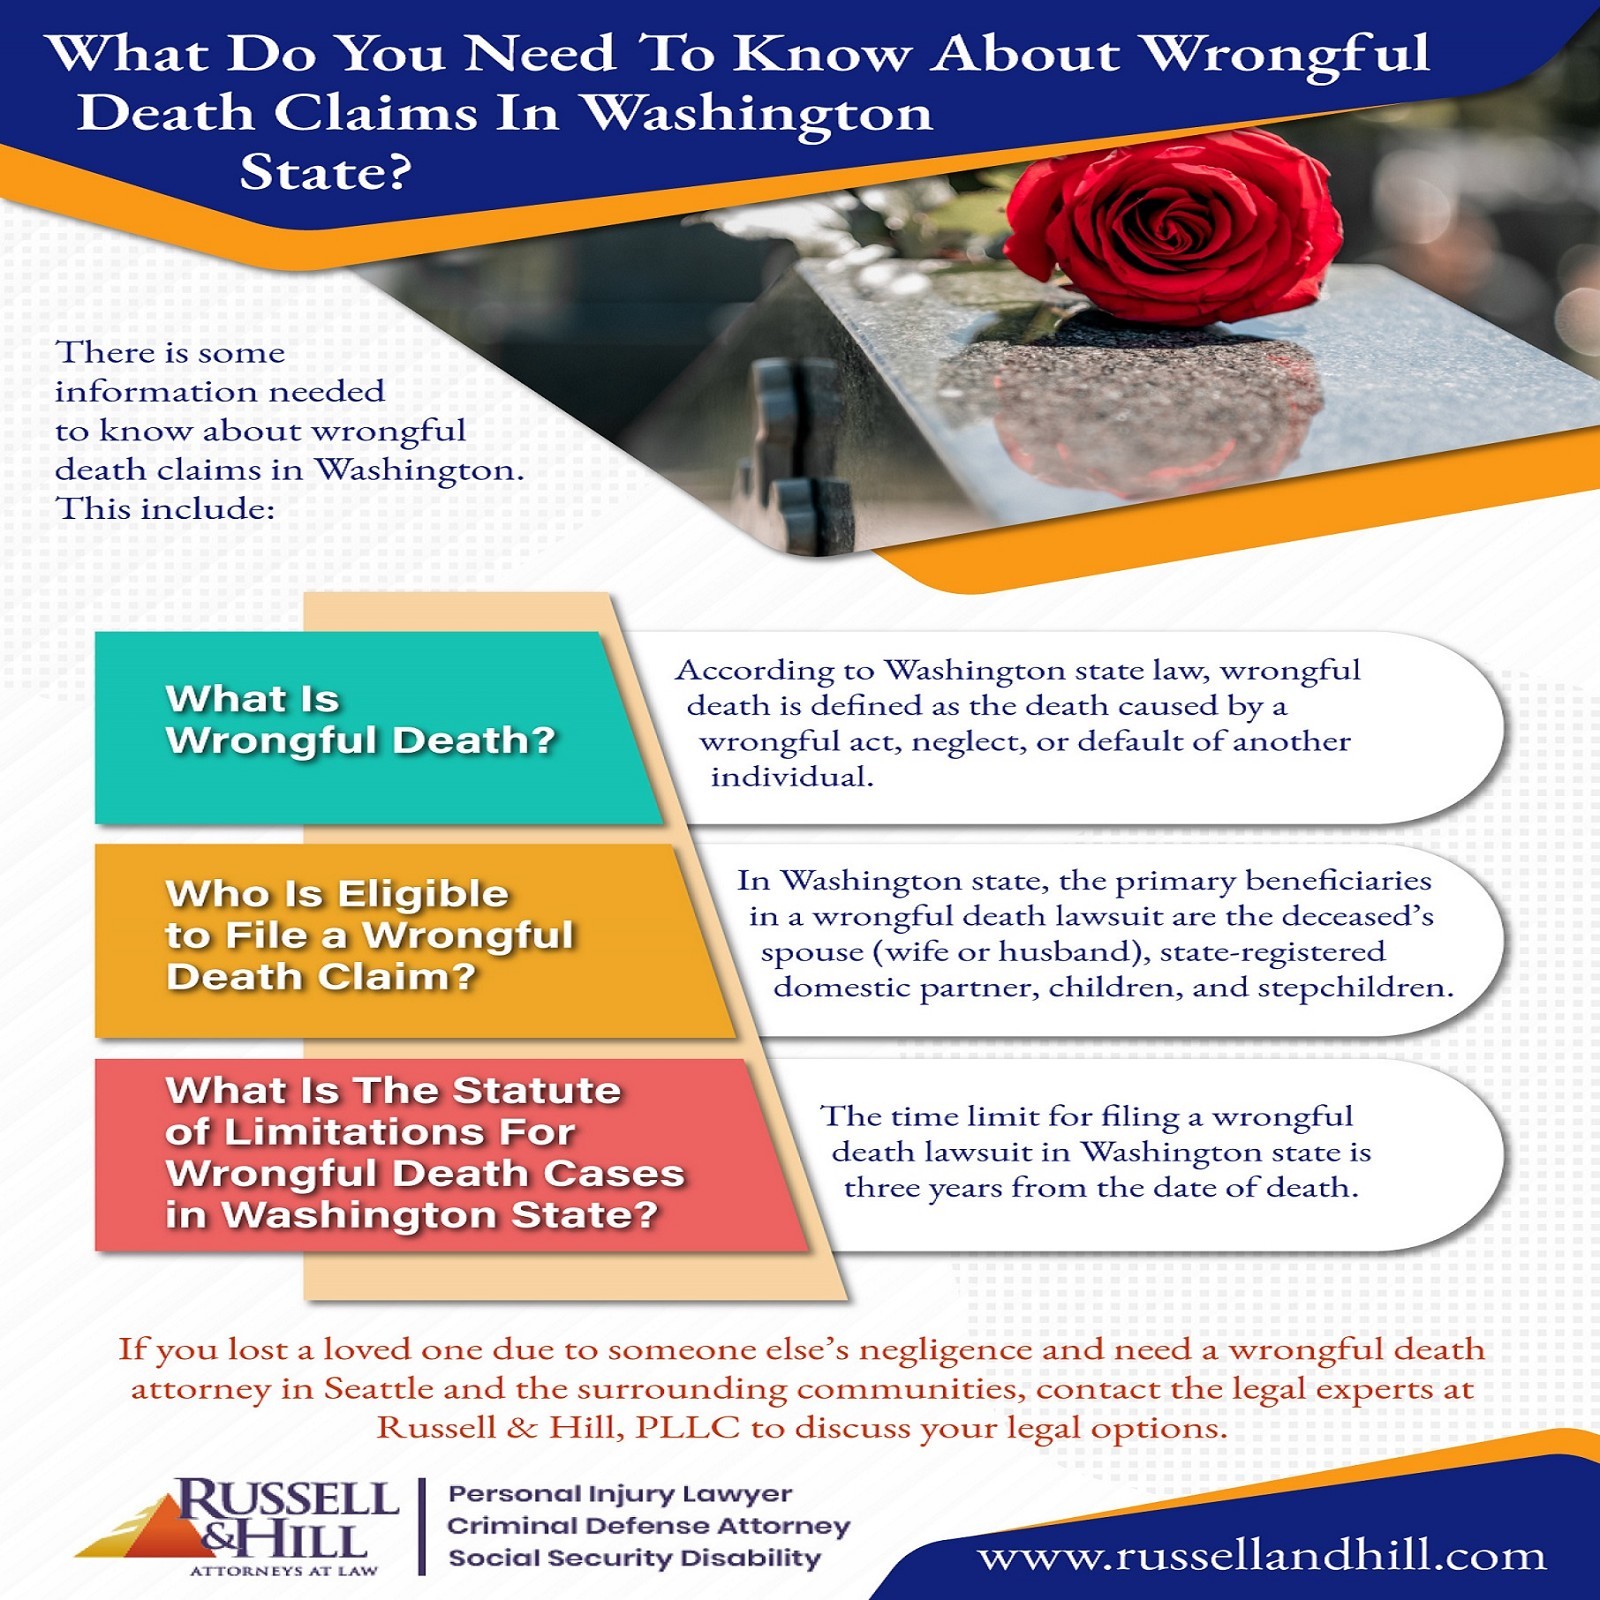 What Do You Need To Know About Wrongful Death Claims In Washington State?